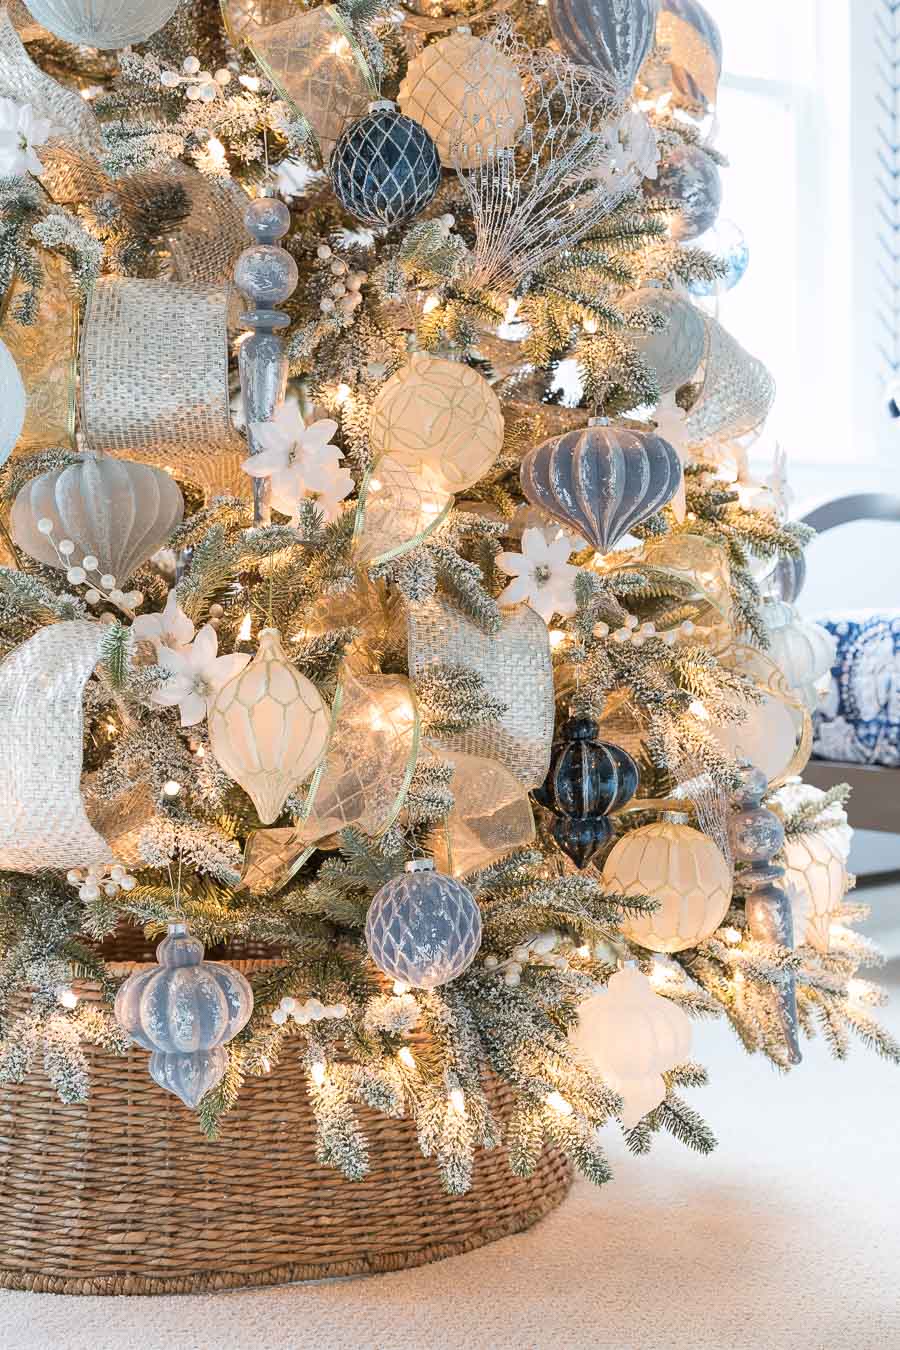 Love this woven tree collar as an alternative to a typical Christmas tree skirt!